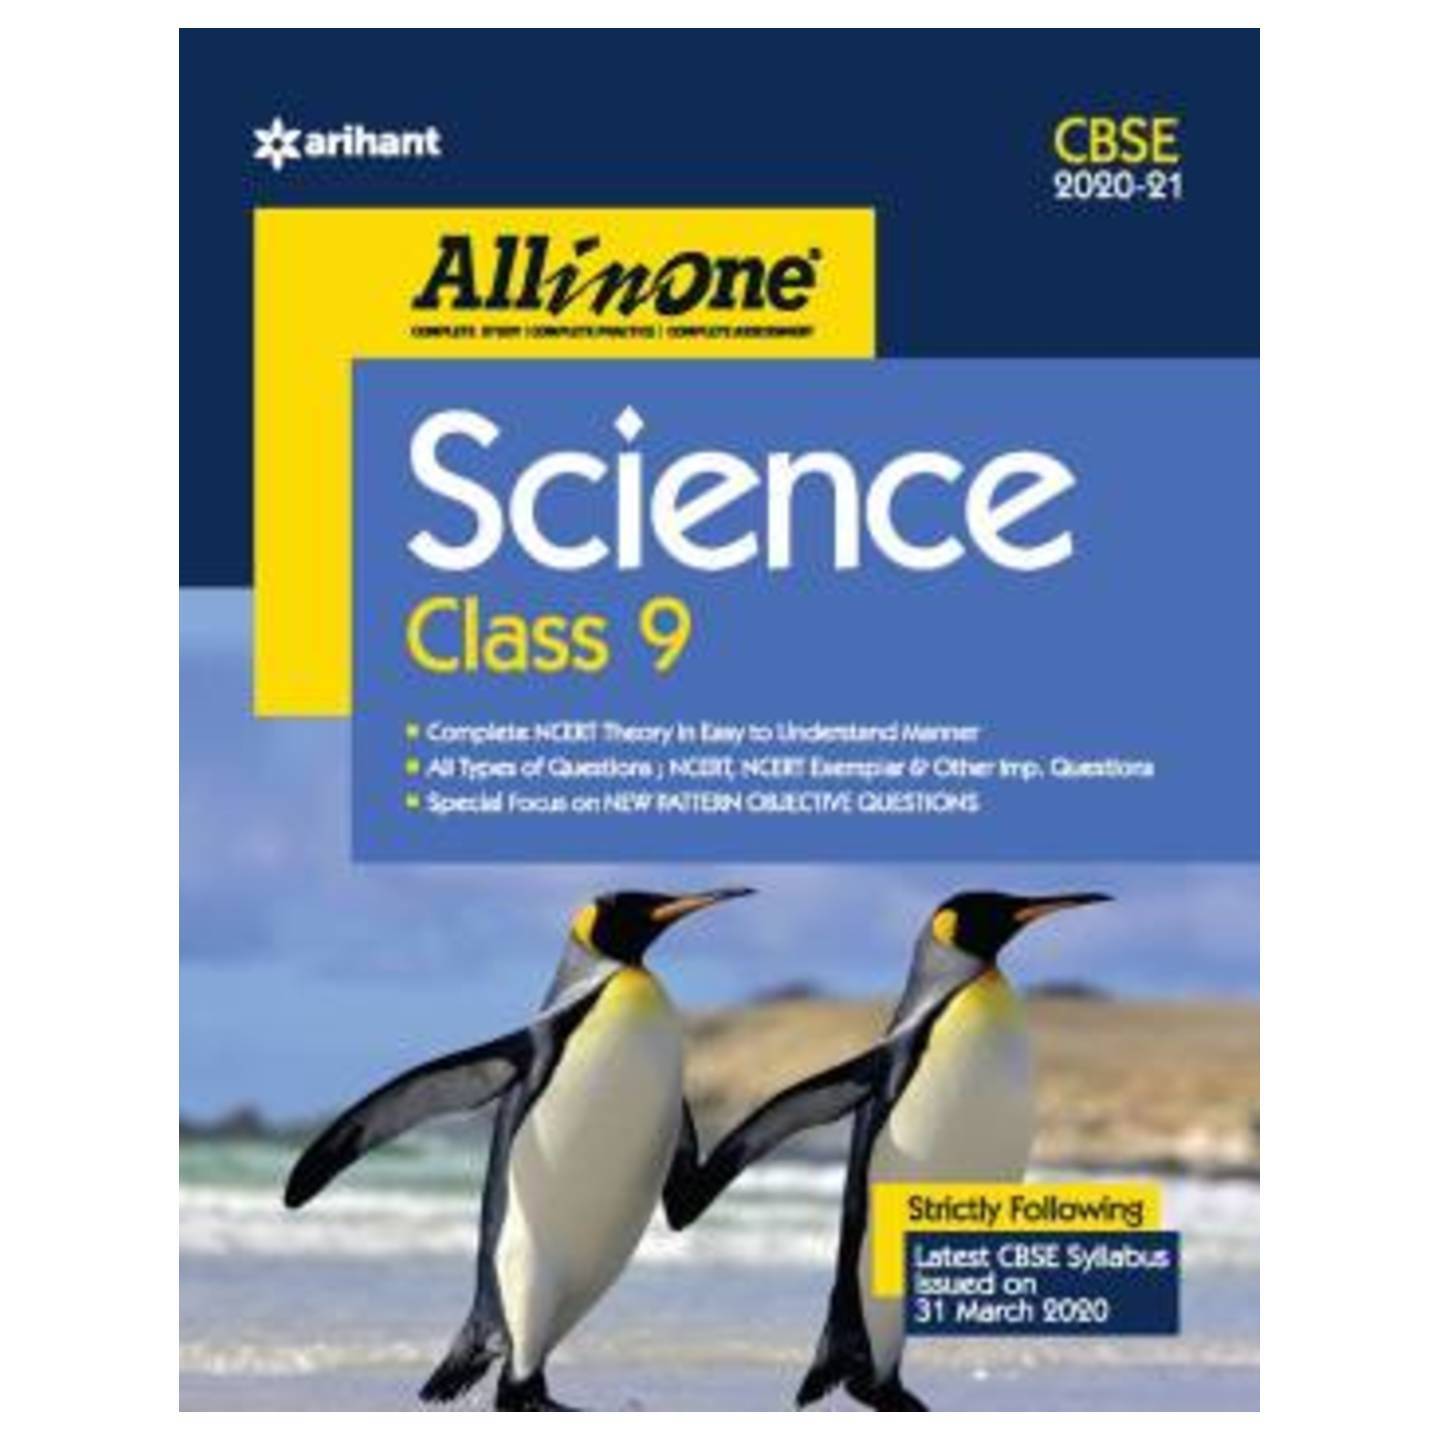 Cbse All in One Science Class 9